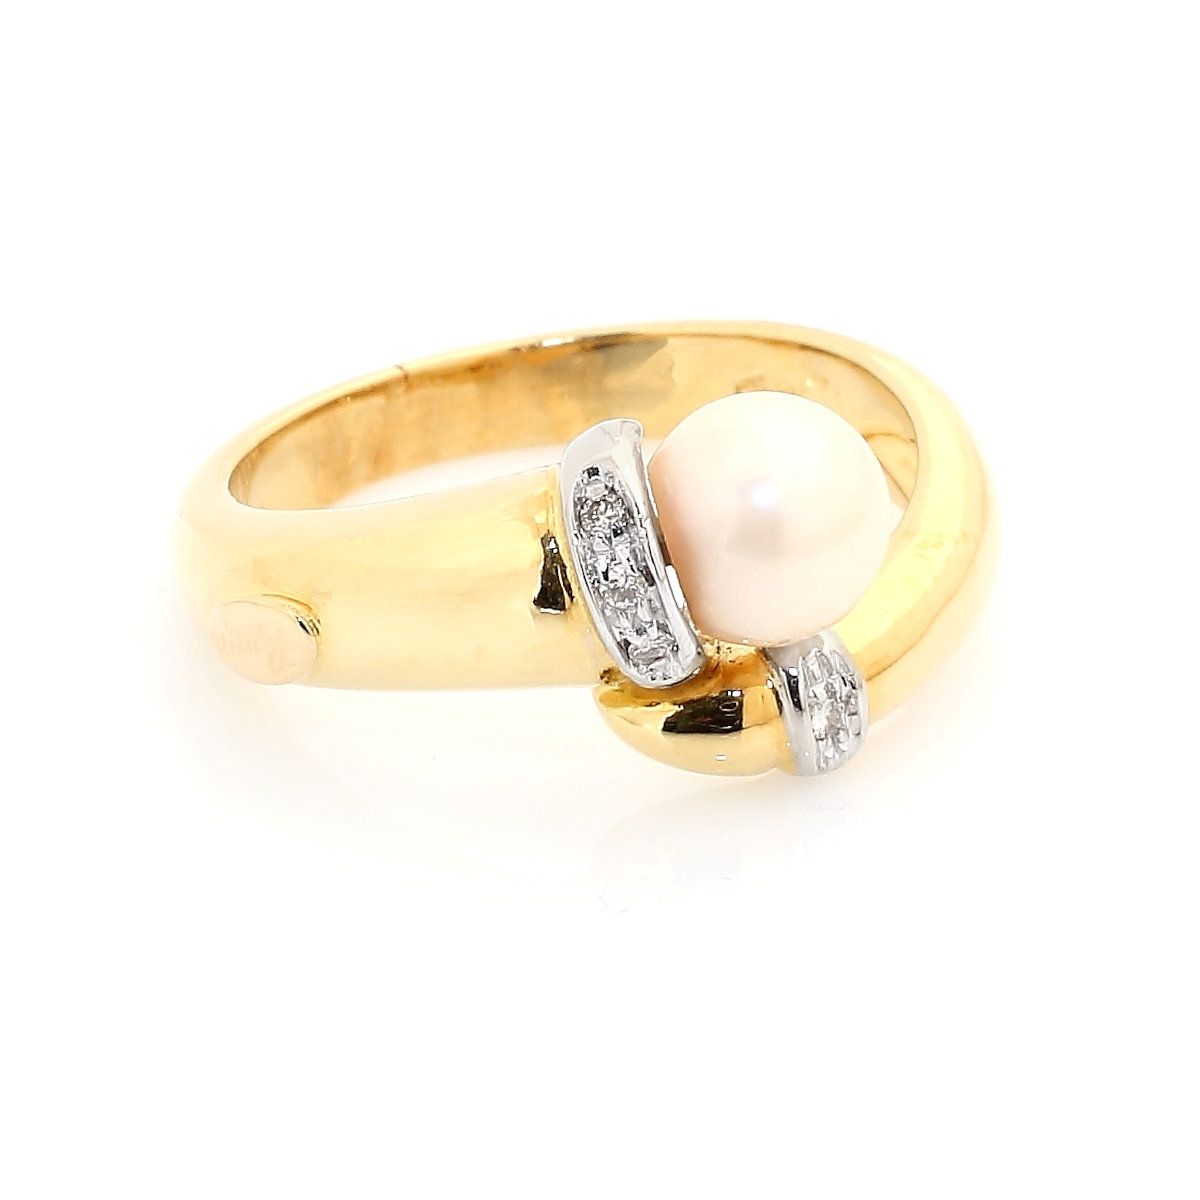 Vintage Gold Ring with Diamonds and Pearl